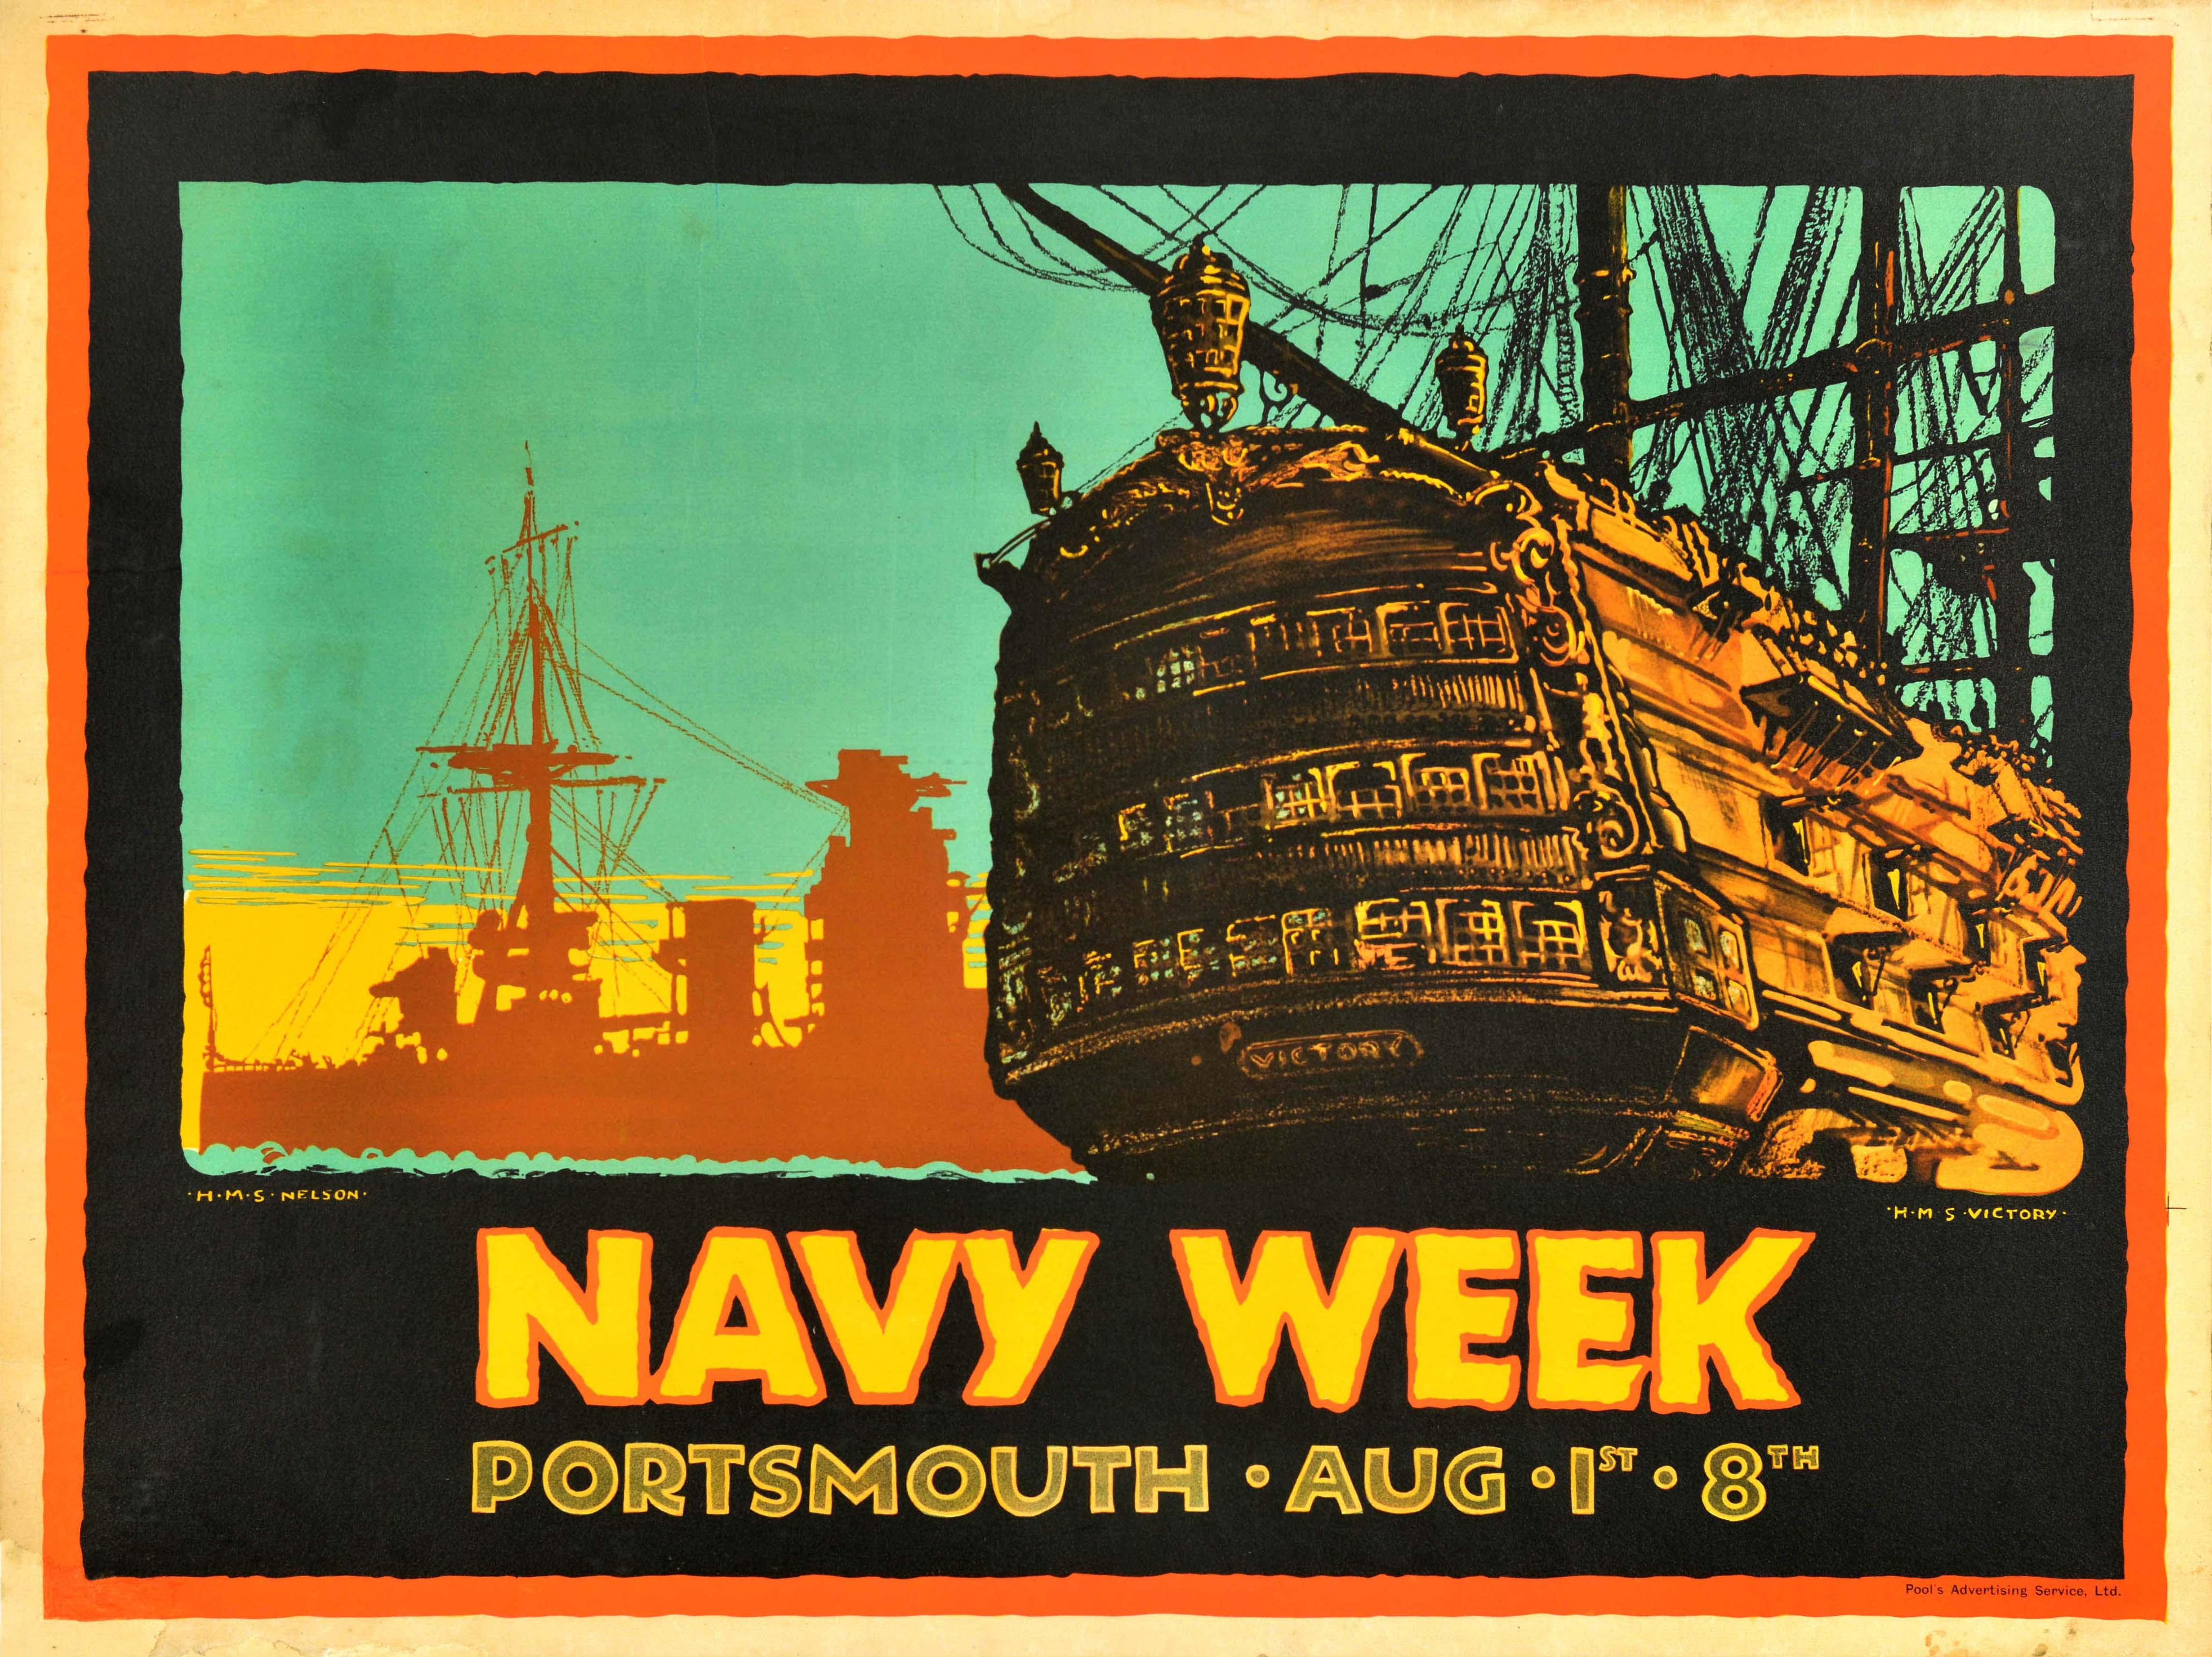 Unknown Print - Original Vintage Advertising Poster Navy Week Portsmouth HMS Nelson Victory Ship